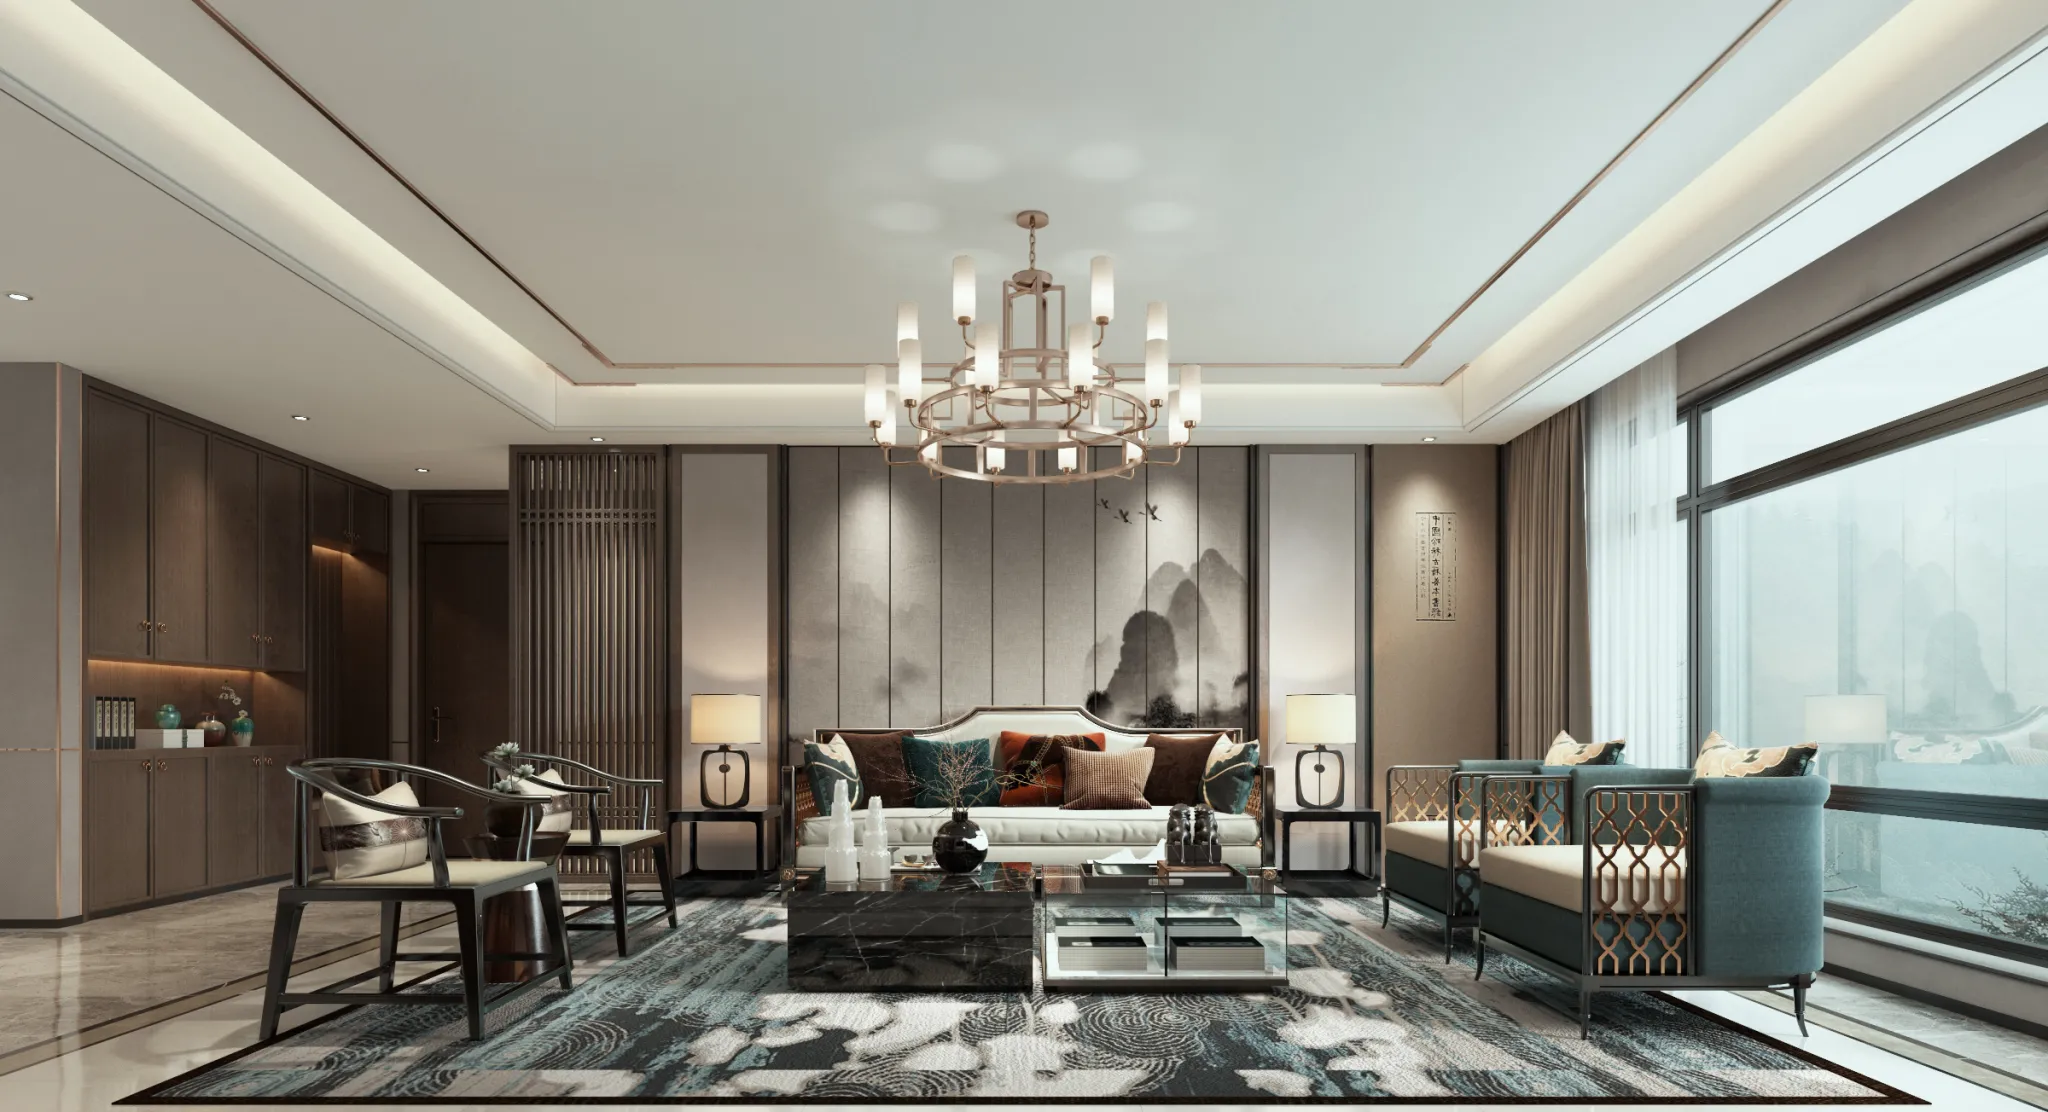 DESMOD INTERIOR 2021 (VRAY) – 4. LIVING ROOM – CHINESE – 121 (1)